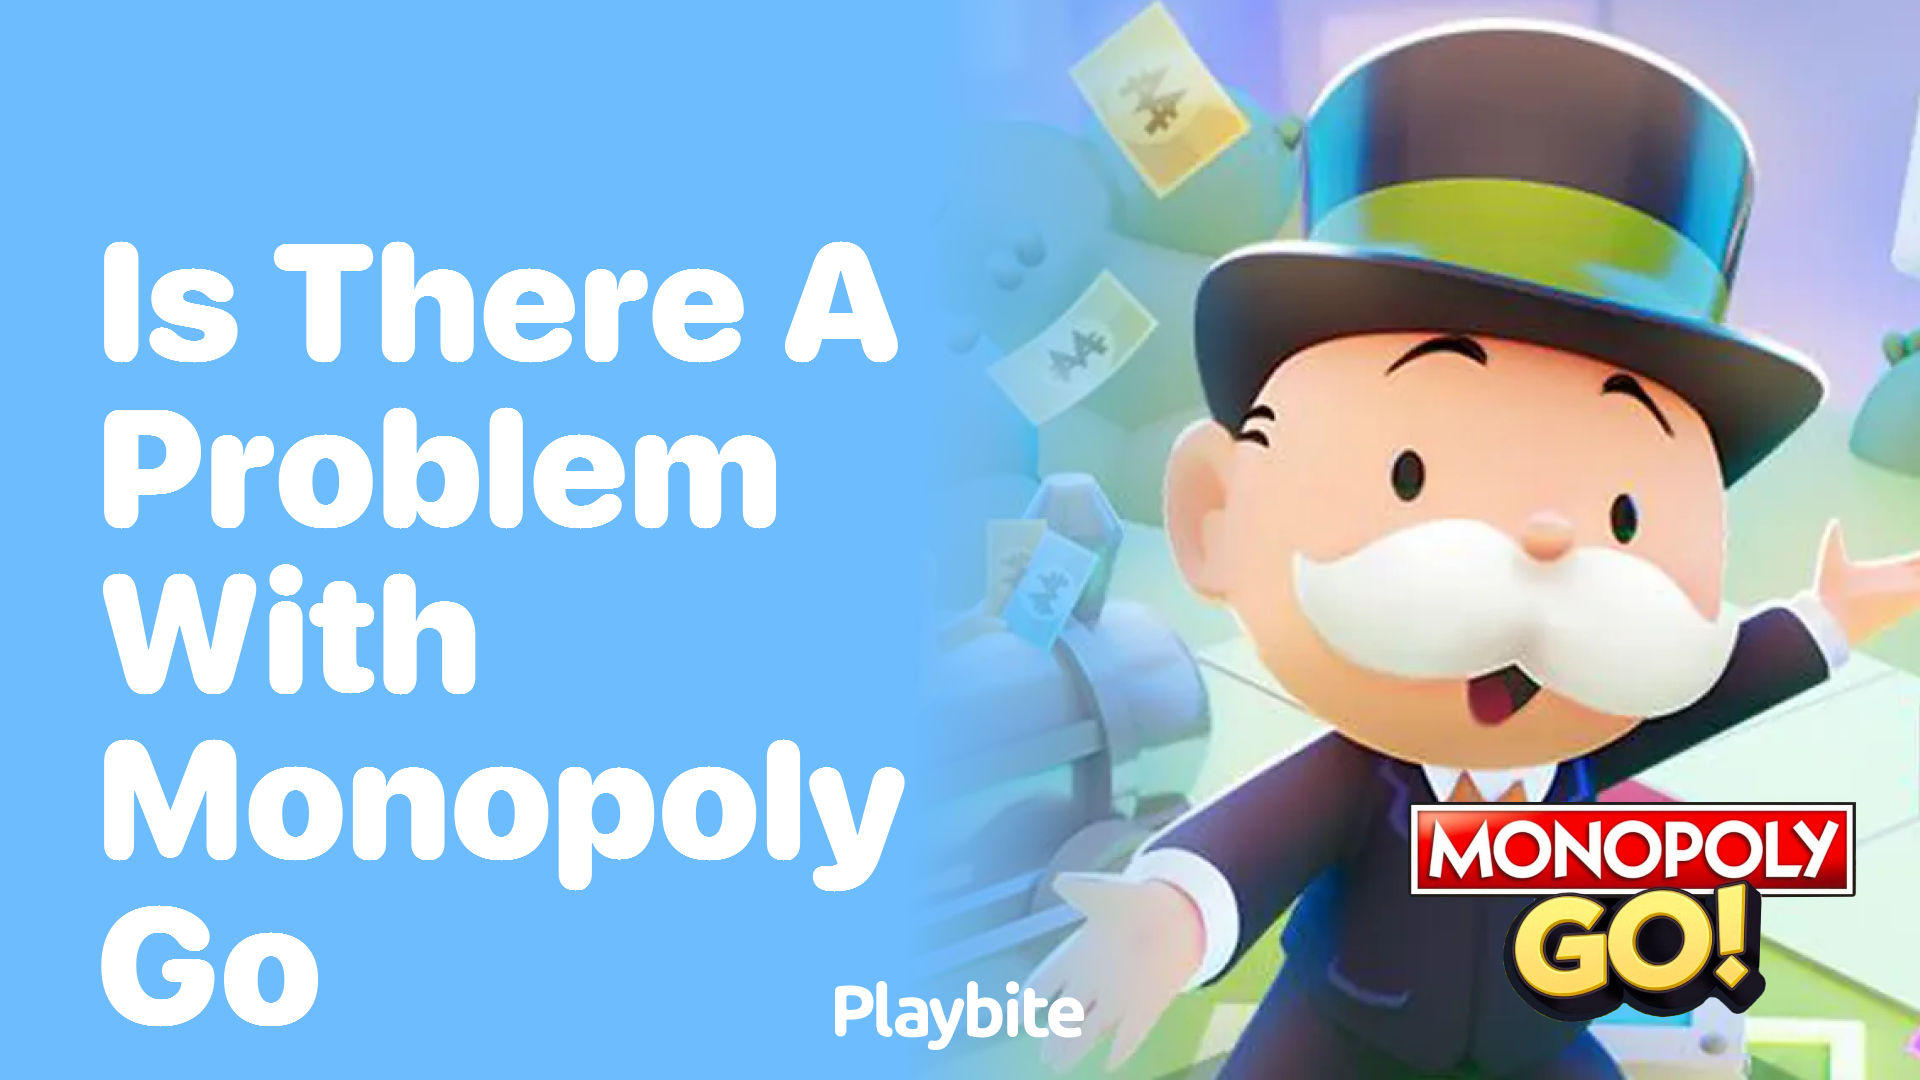 Is There a Problem with Monopoly Go?